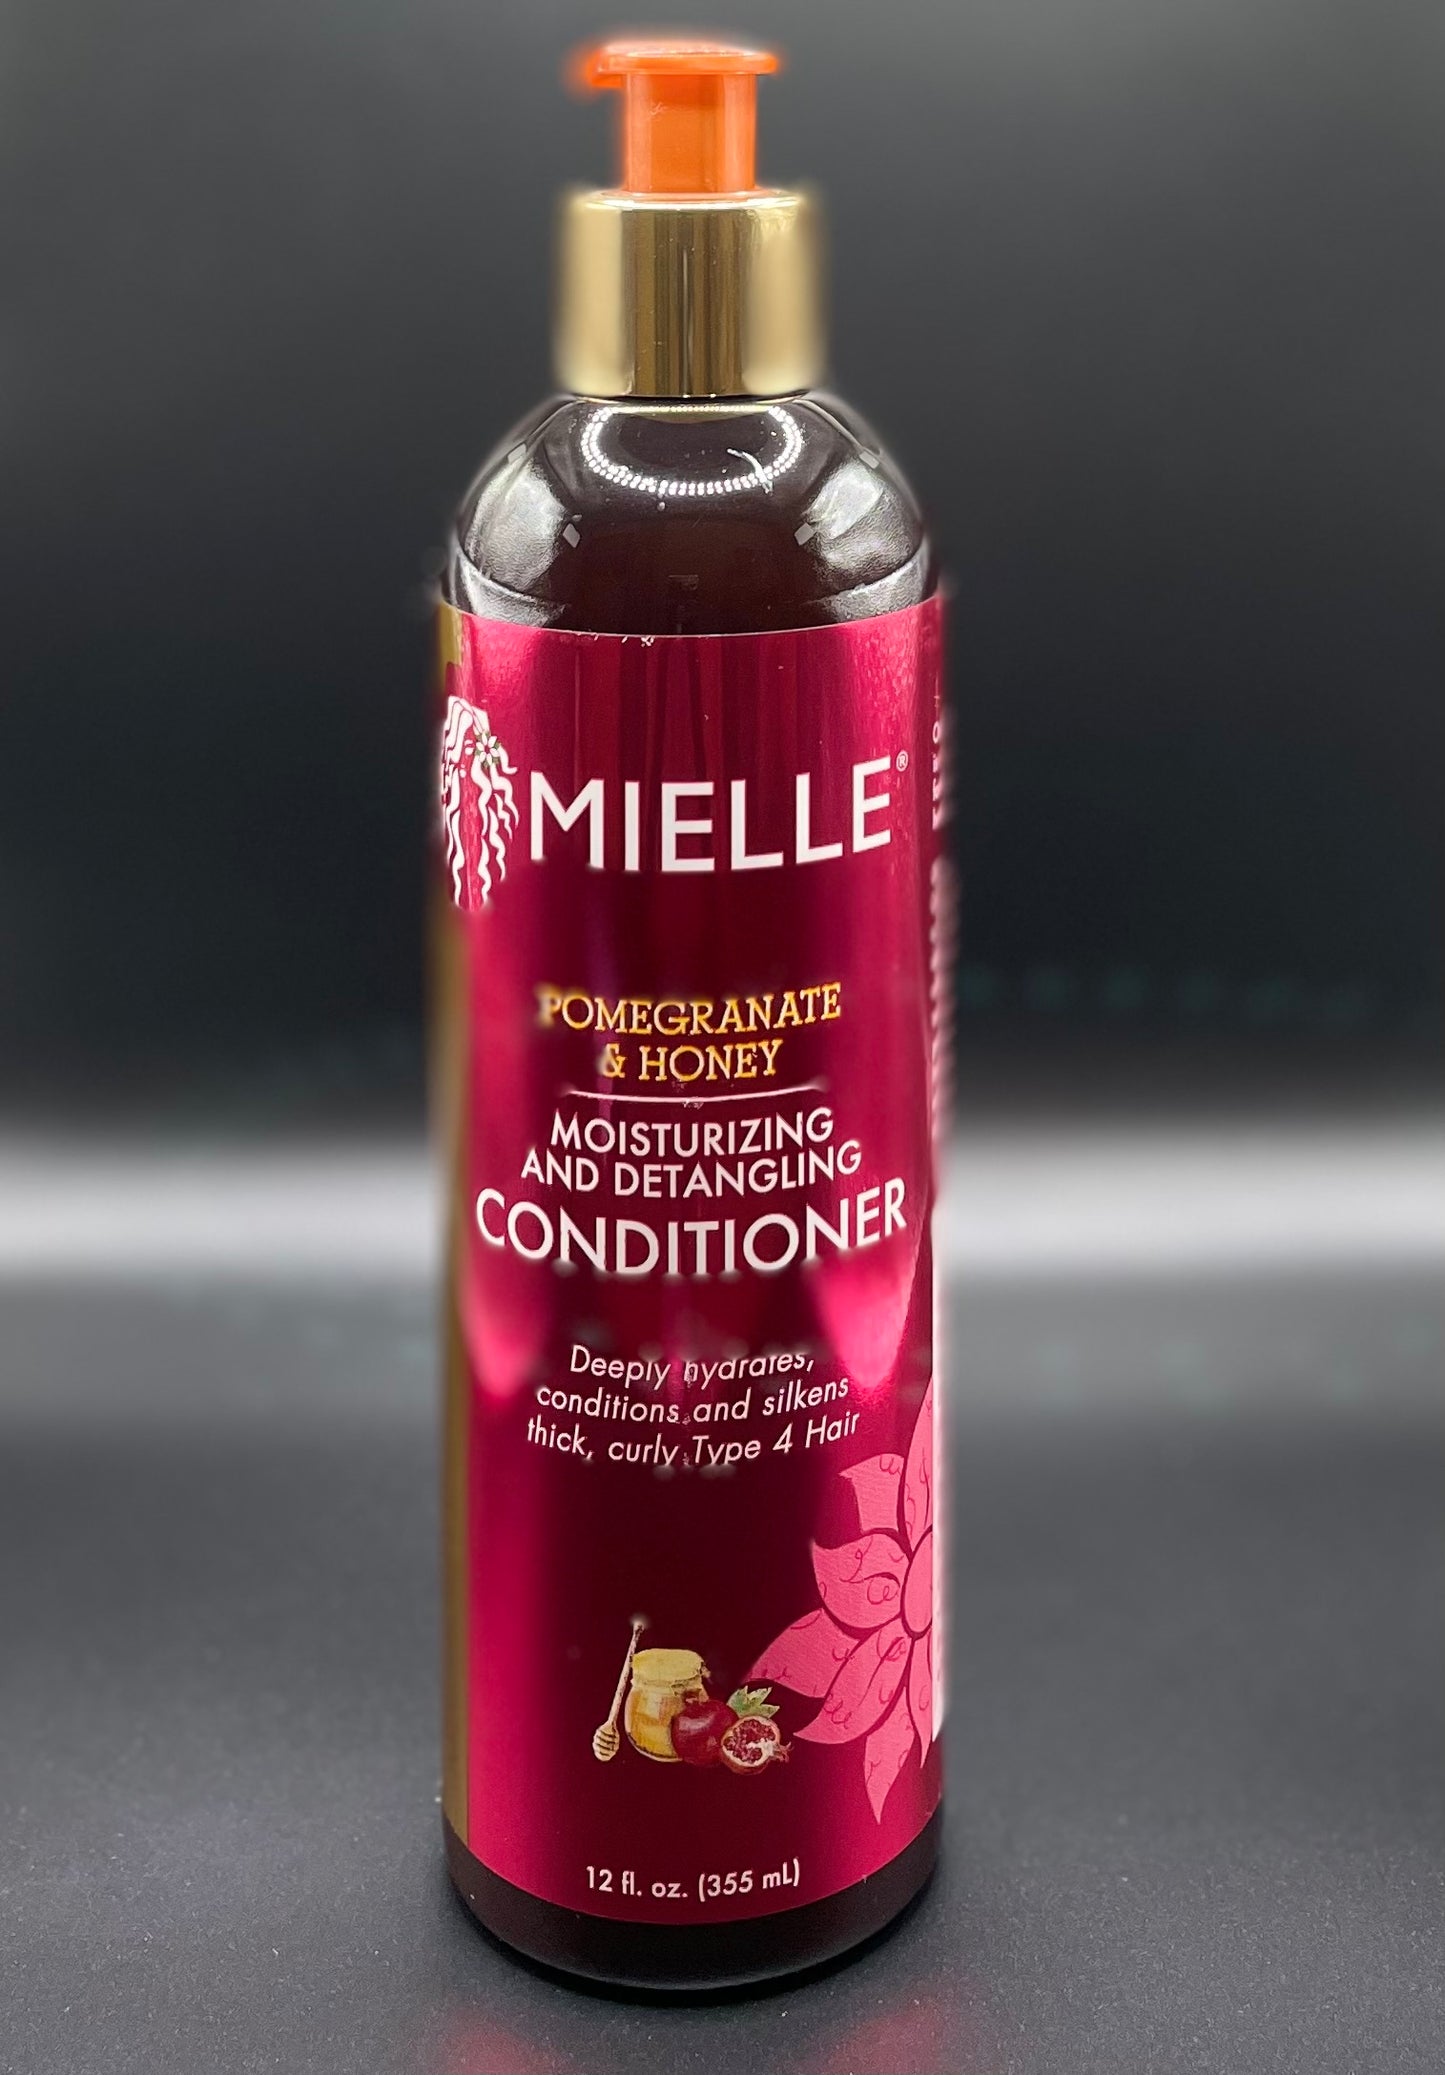 Mielle-Pomegranate & Honey Moisturizing and Detangling Conditioner